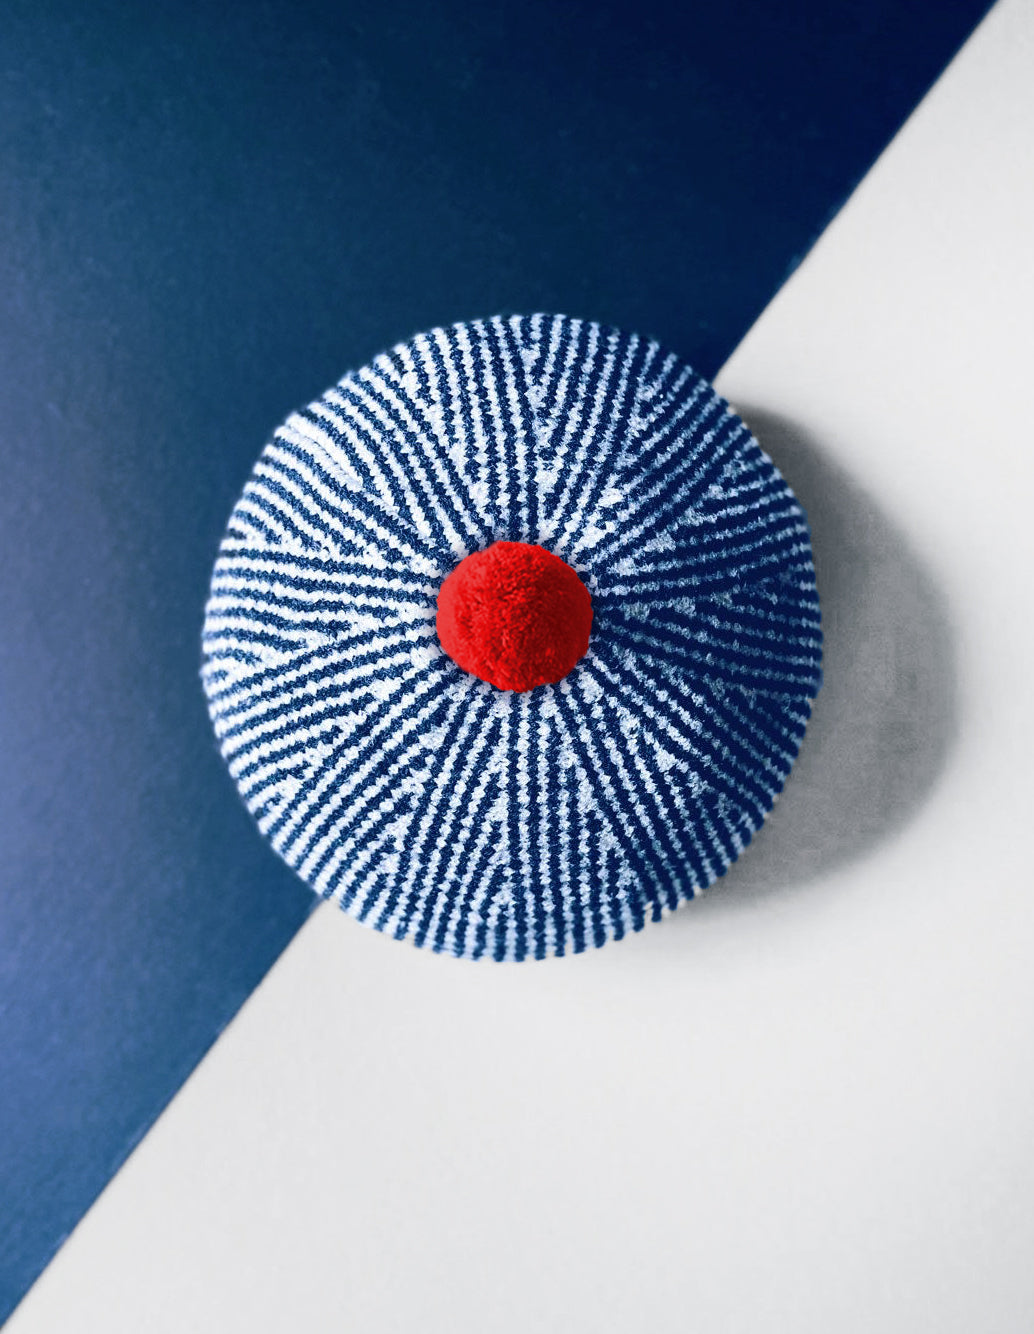 Beret Hat - Stripe Navy and Cream with Bright Red Pom Pom